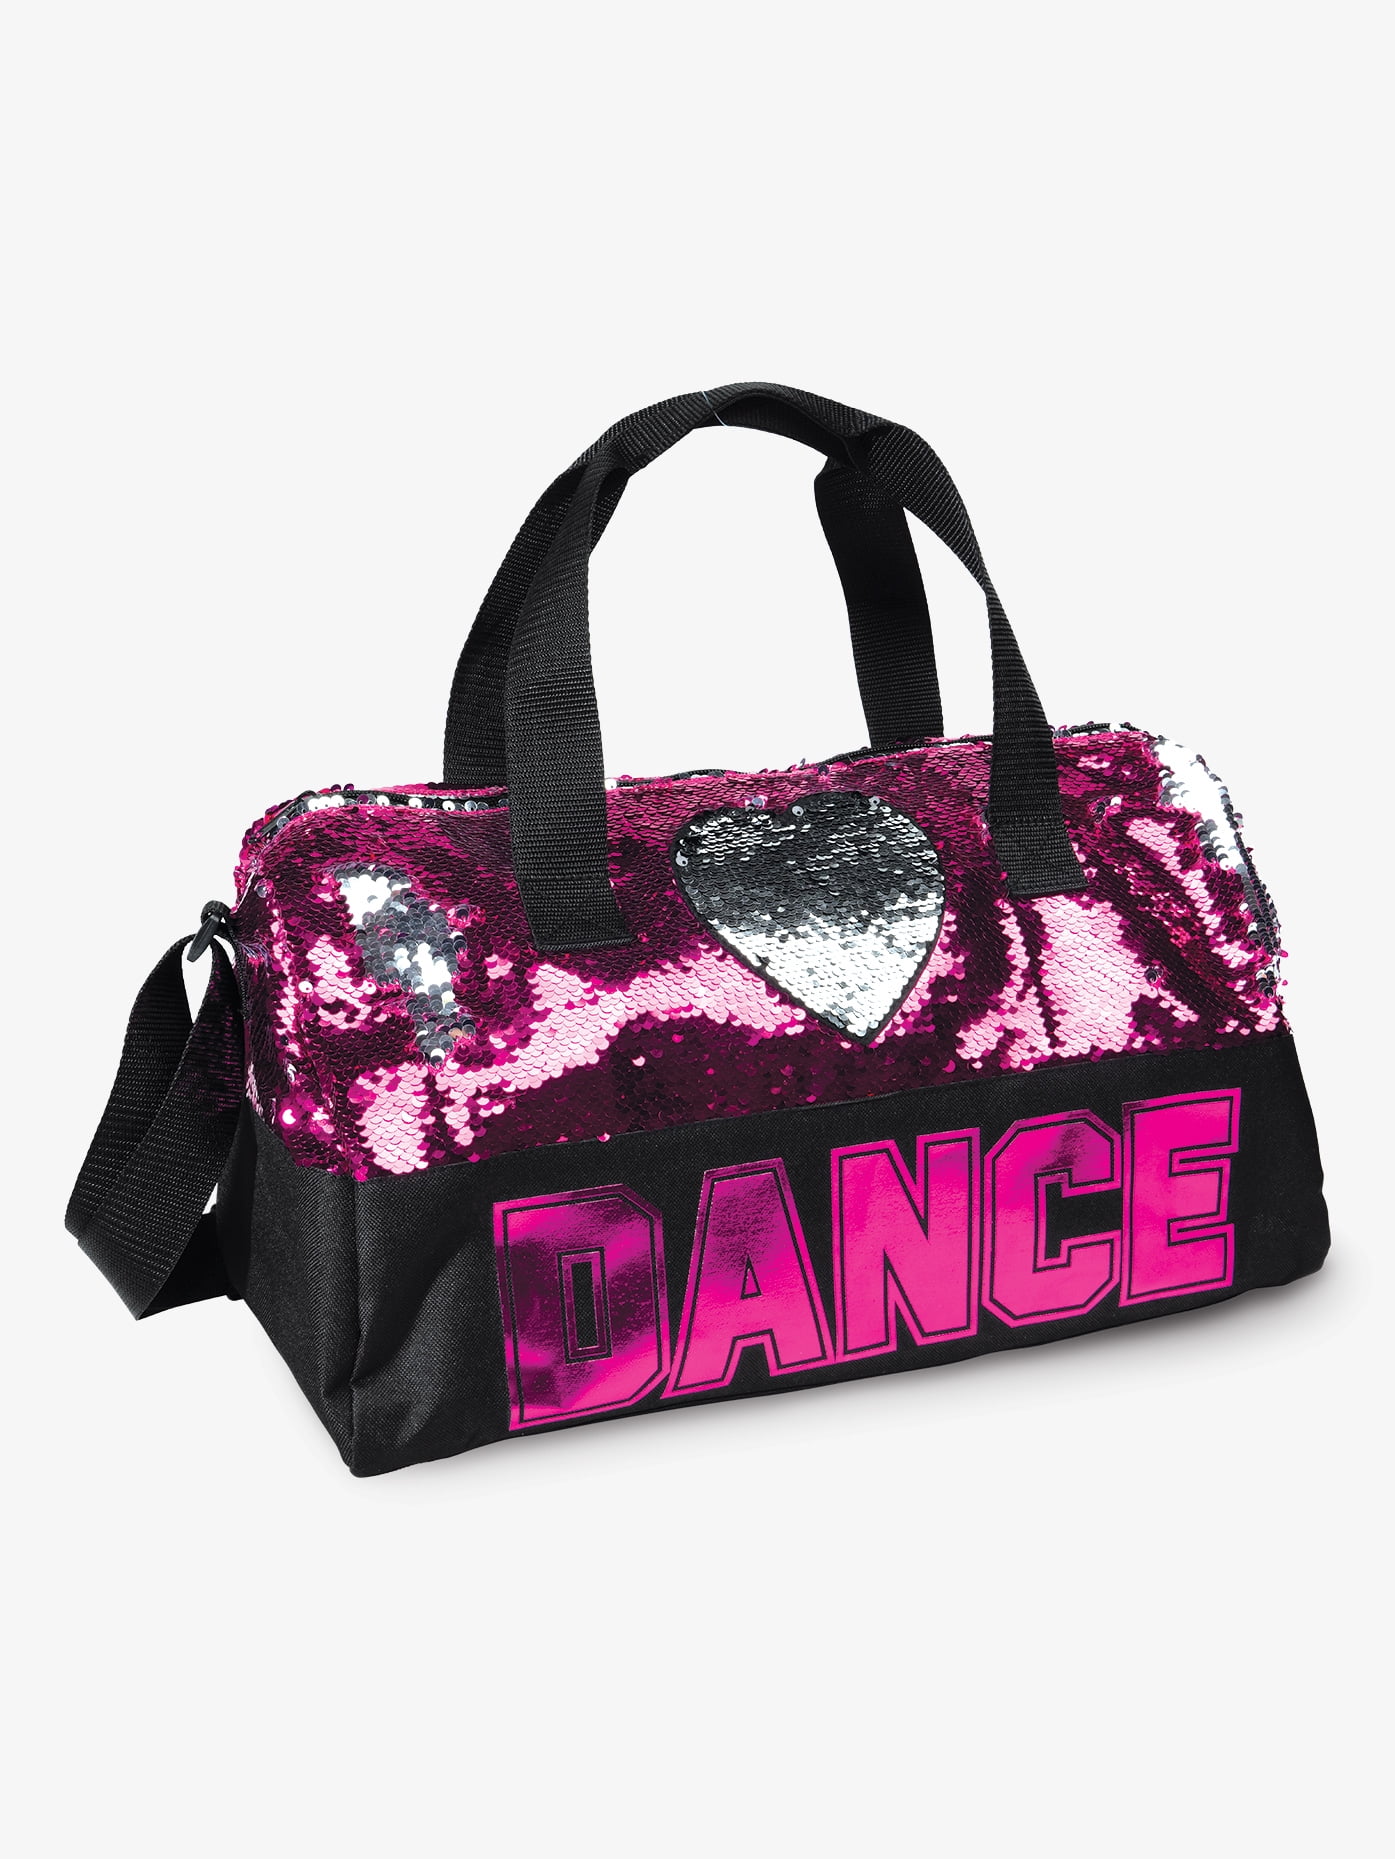 PERSONALIZED Embroidered Deep Purple & Hot Pink Dance Duffel Bag Sequin Bows